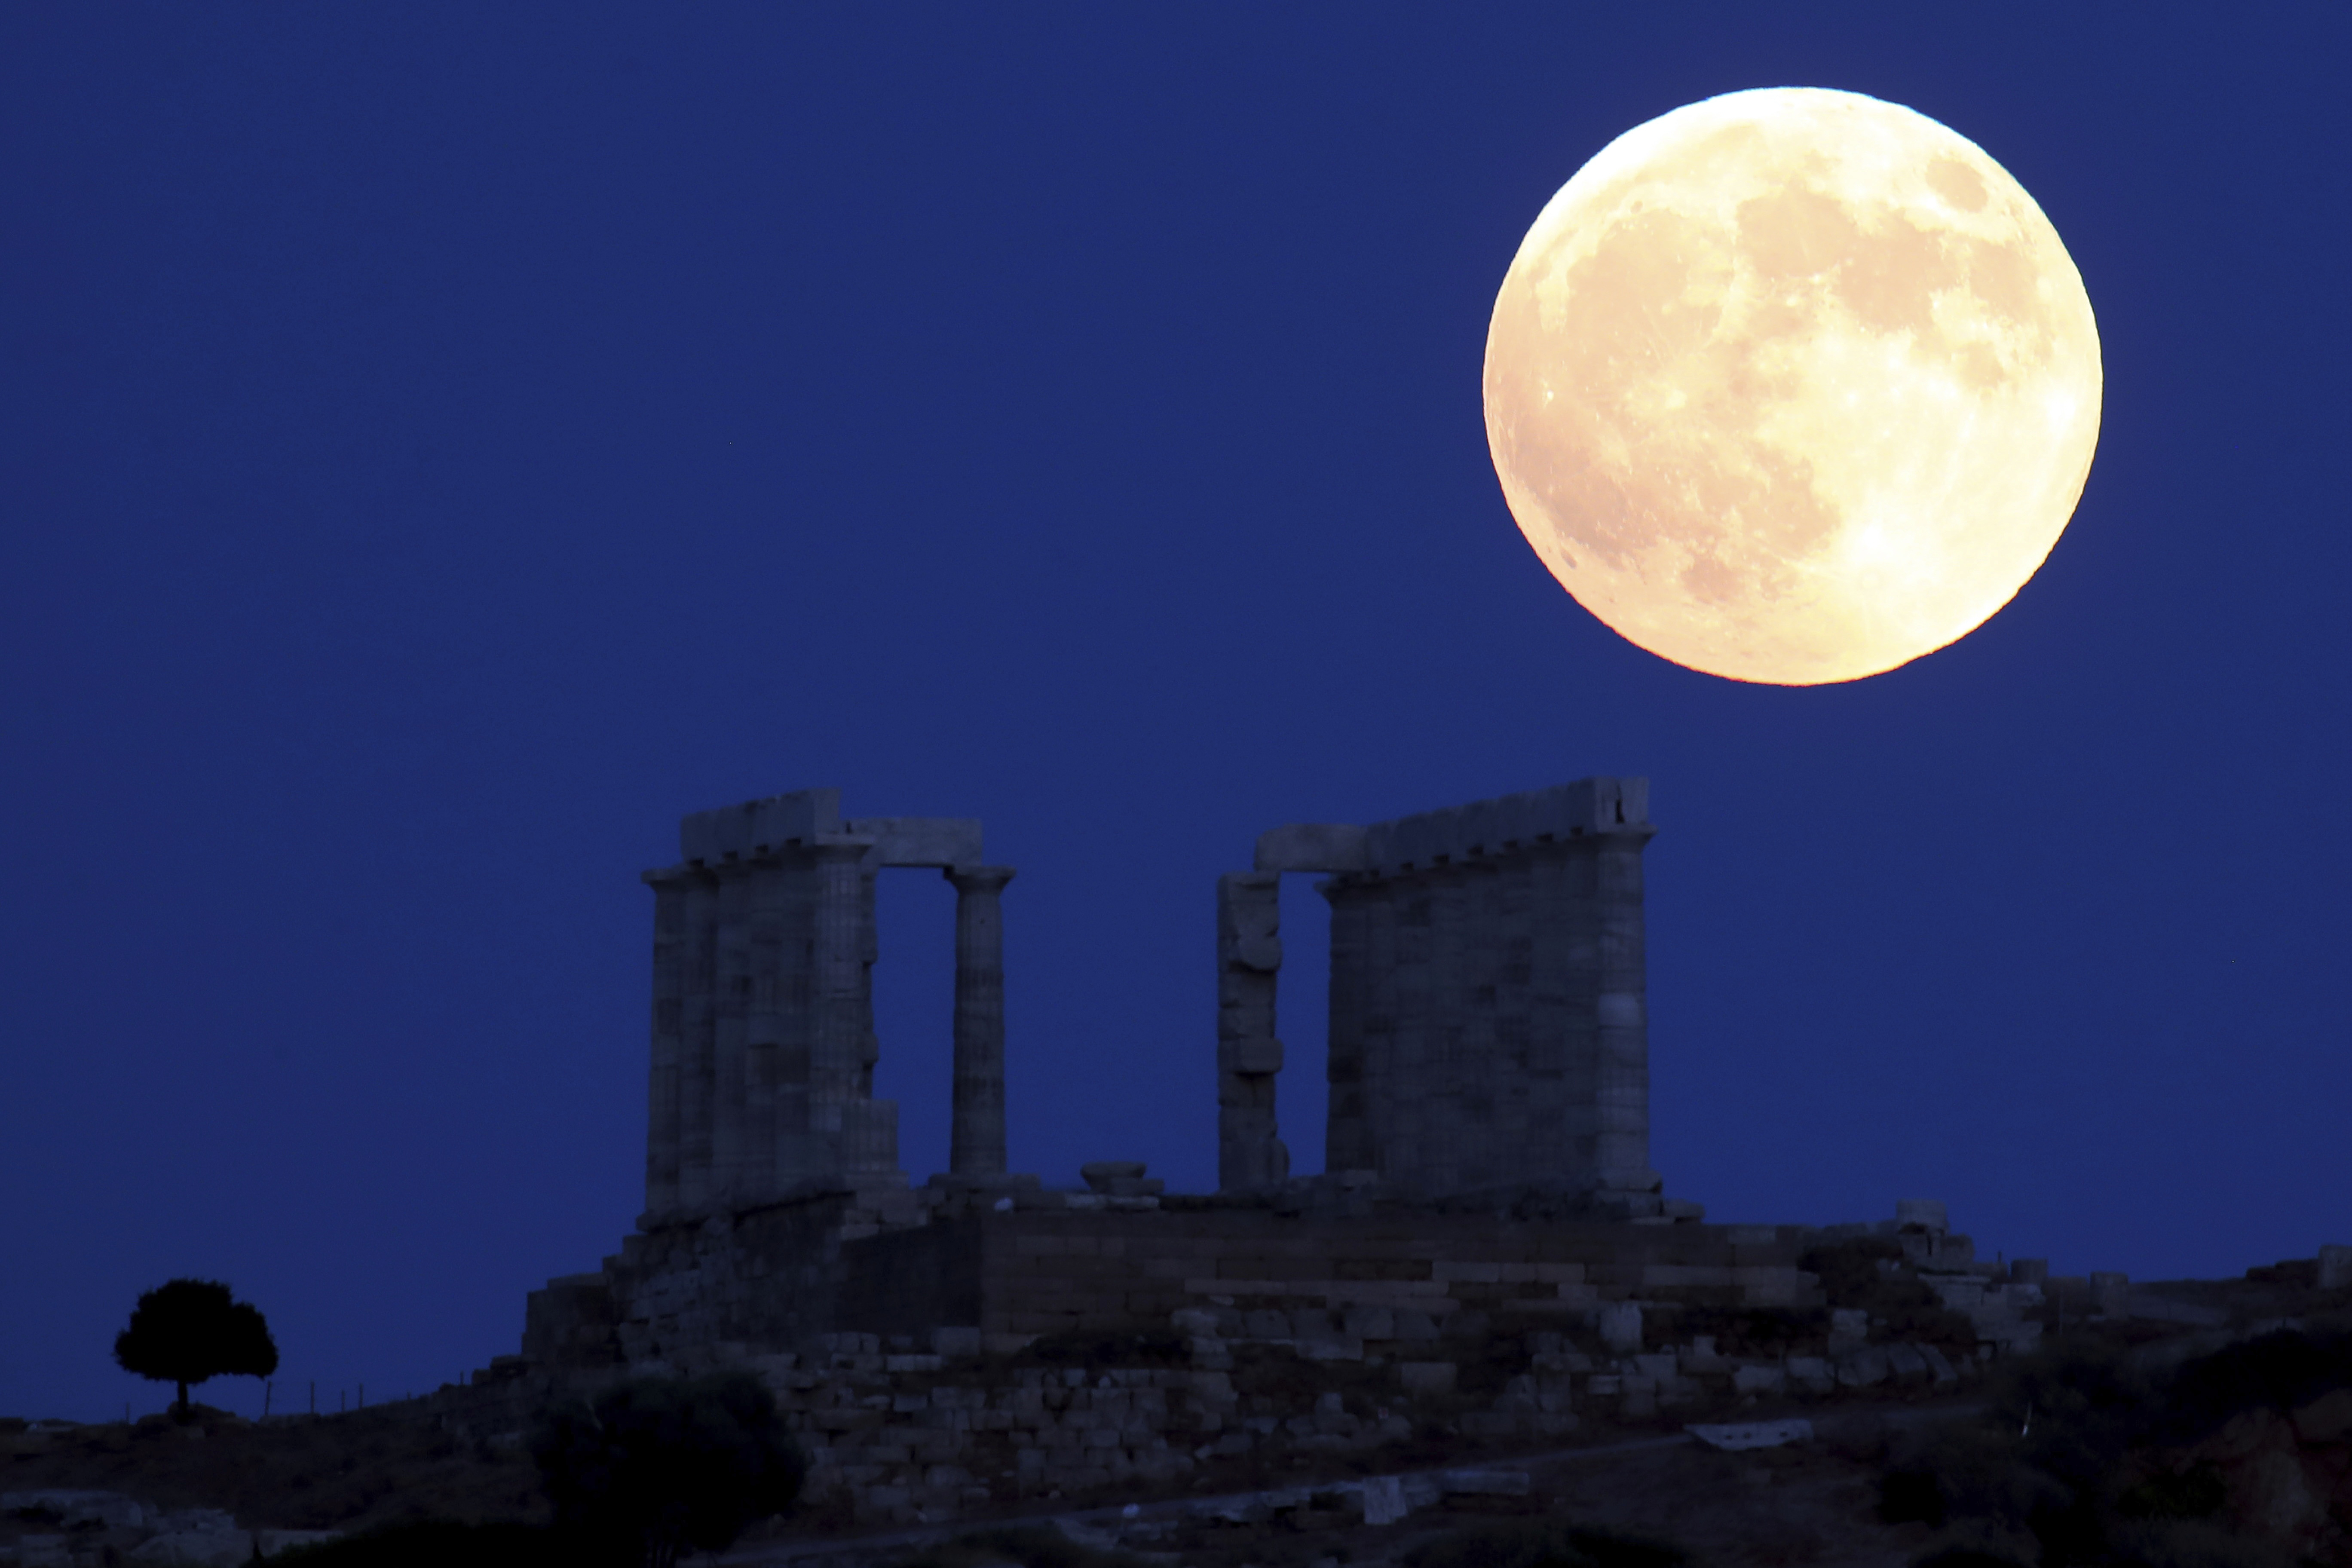 A full moon rises over the ancient Temple of Poseidon in Greece